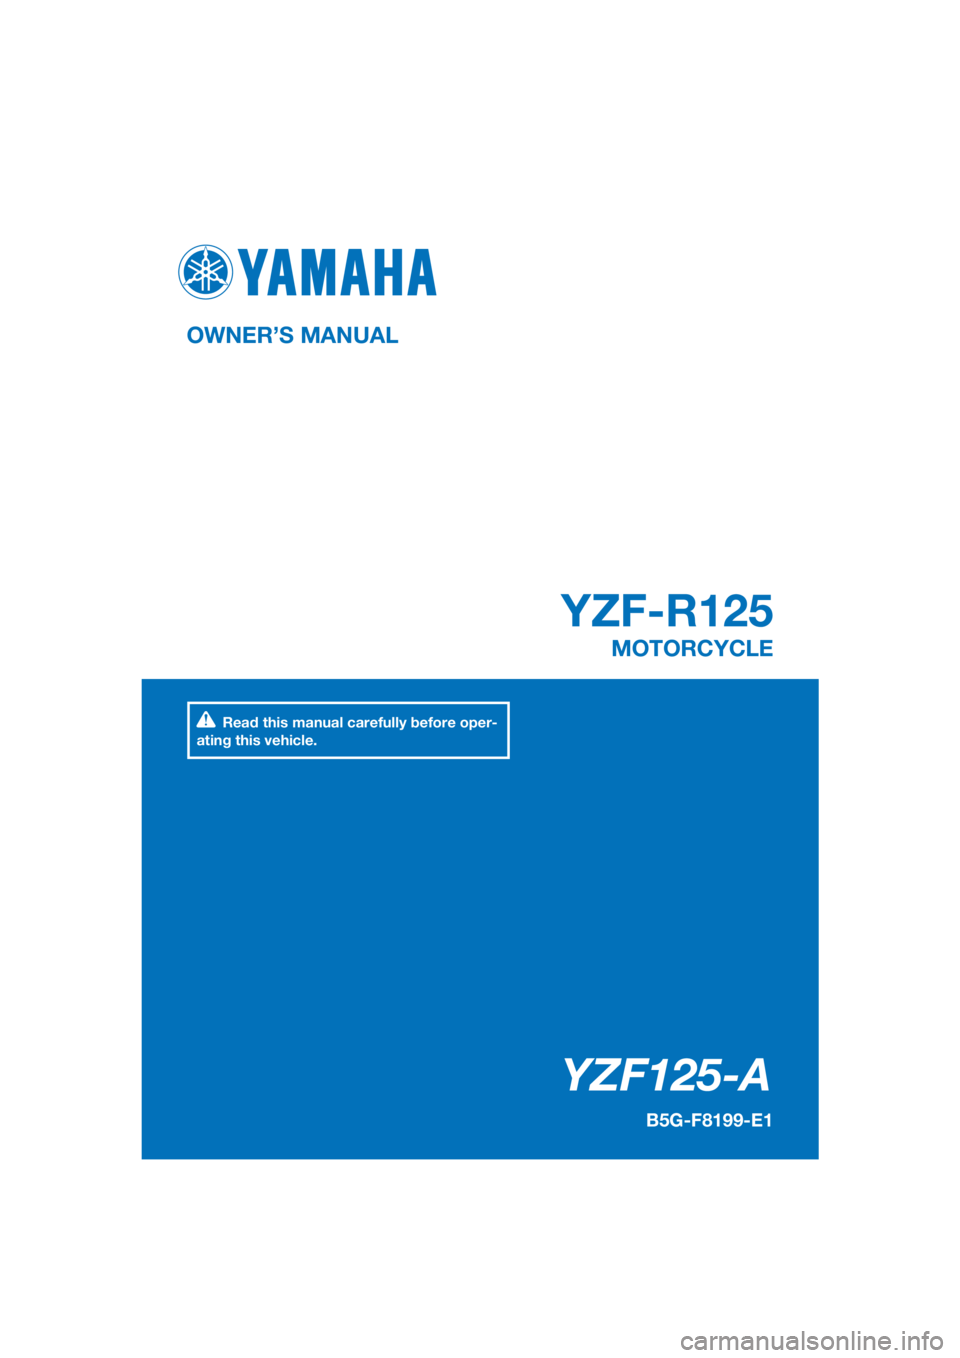 YAMAHA YZF-R125 2020  Owners Manual PANTONE285C
YZF125-A
YZF-R125
OWNER’S MANUAL
B5G-F8199-E1
MOTORCYCLE
[English  (E)]
Read this manual carefully before oper-
ating this vehicle. 